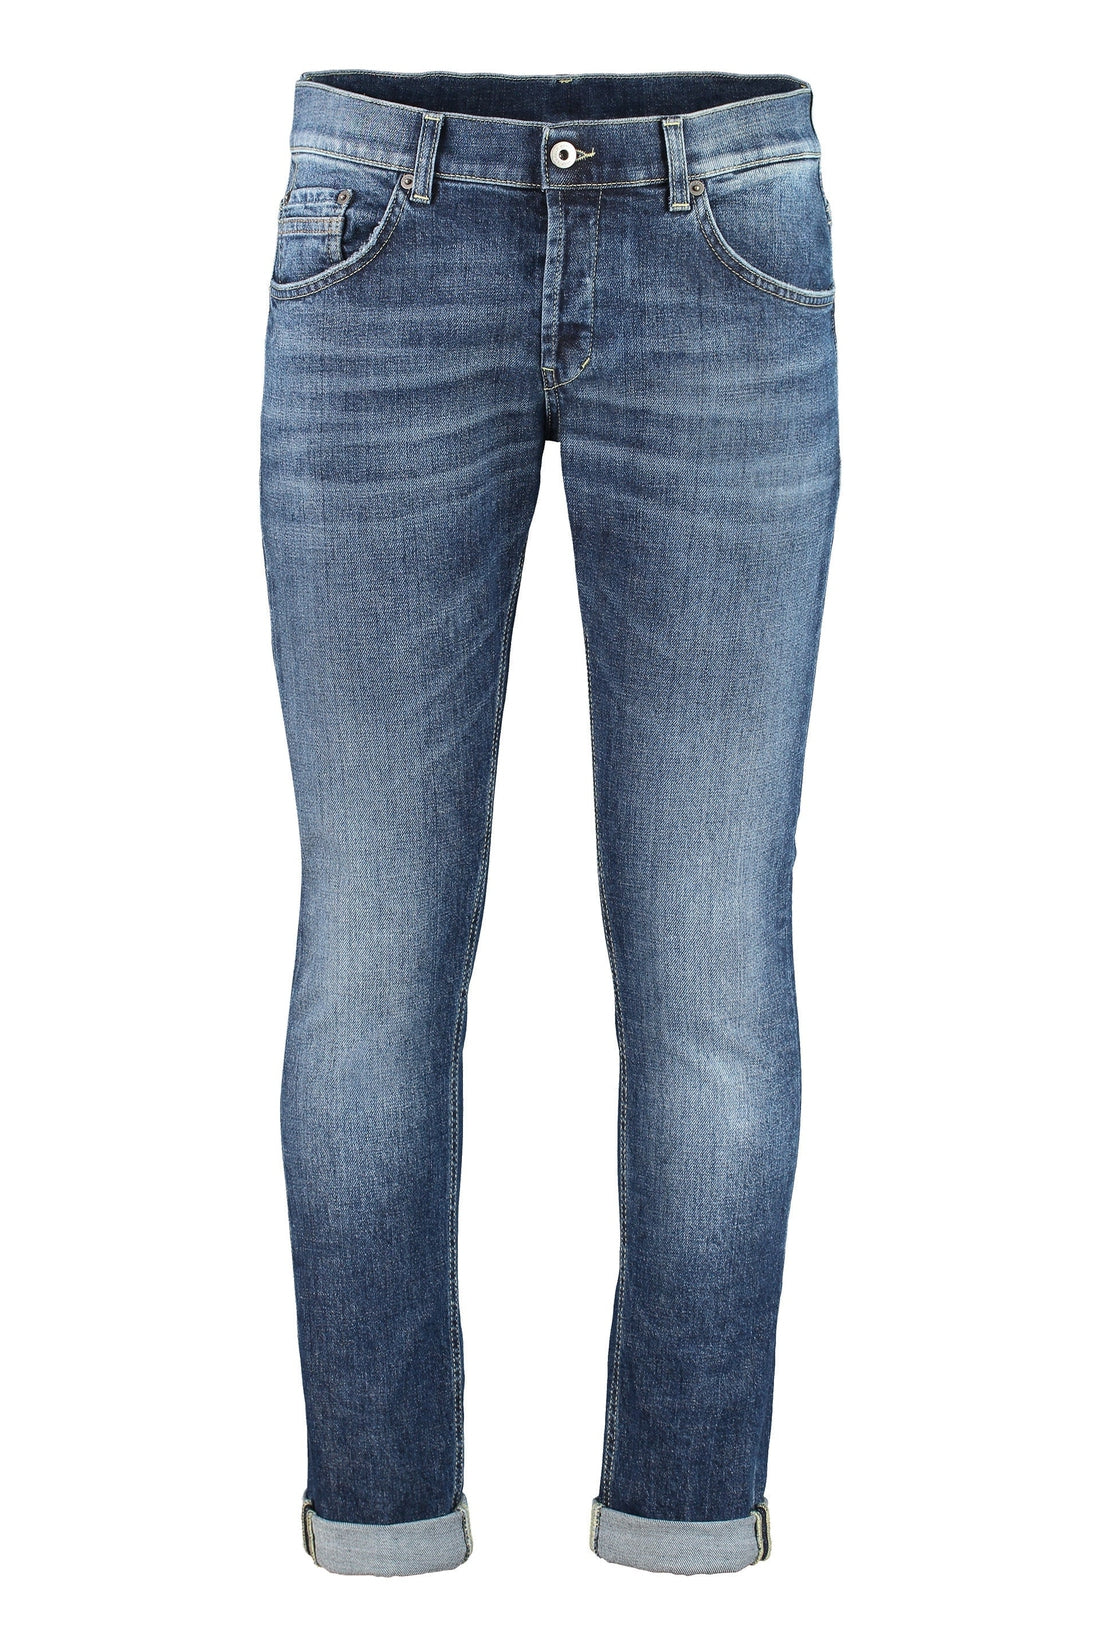 Dondup-OUTLET-SALE-Ritchie skinny jeans-ARCHIVIST